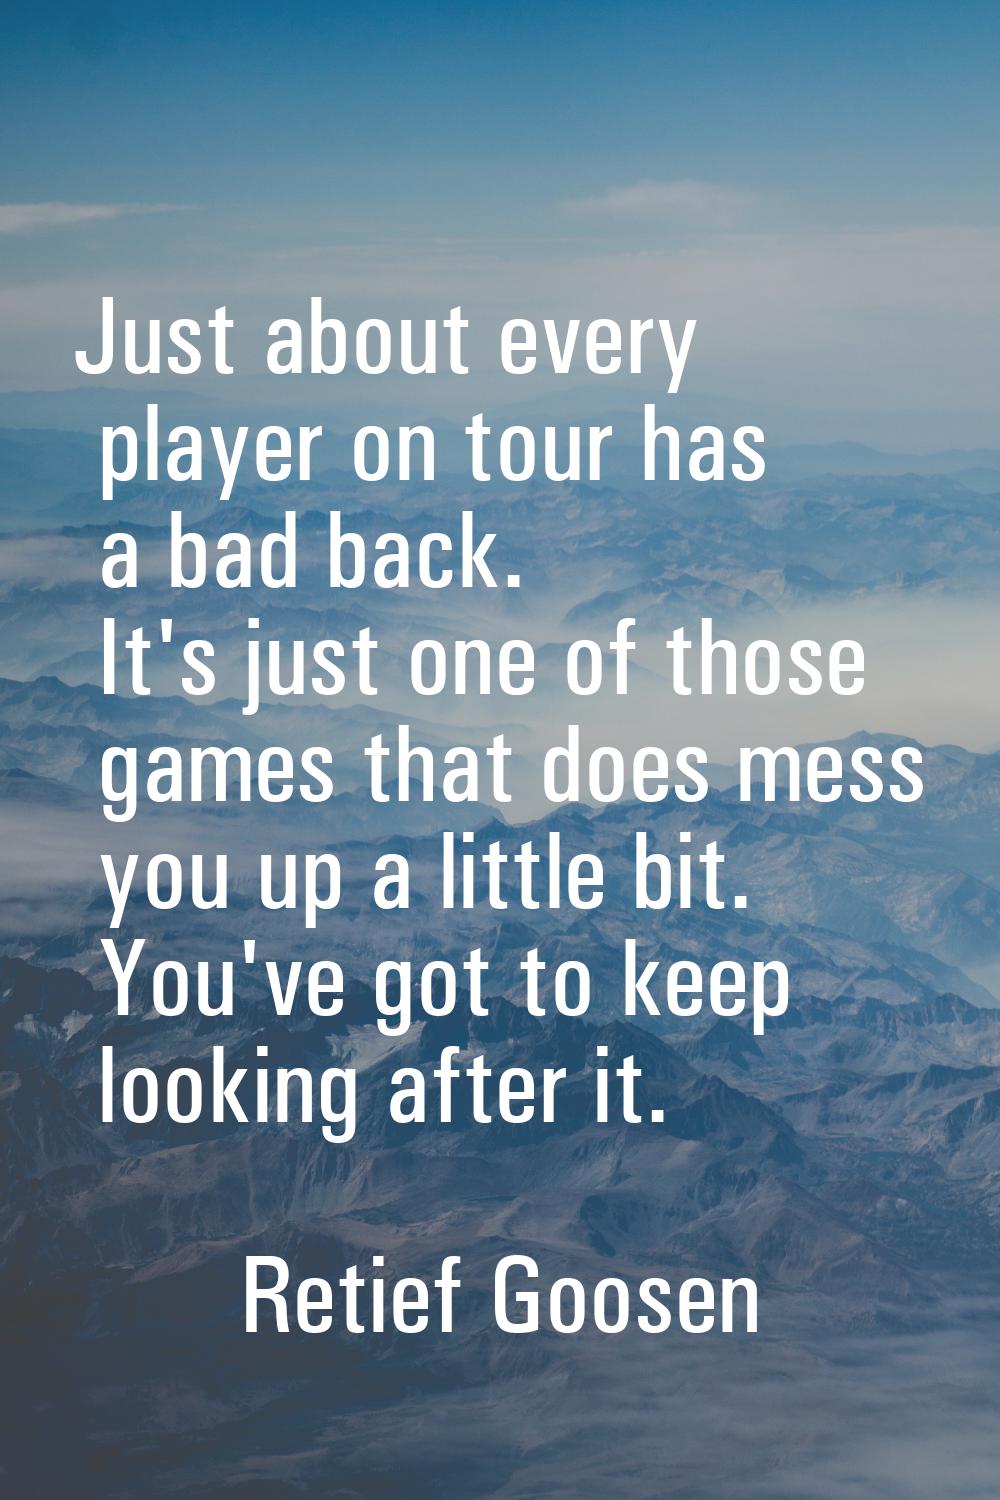 Just about every player on tour has a bad back. It's just one of those games that does mess you up 